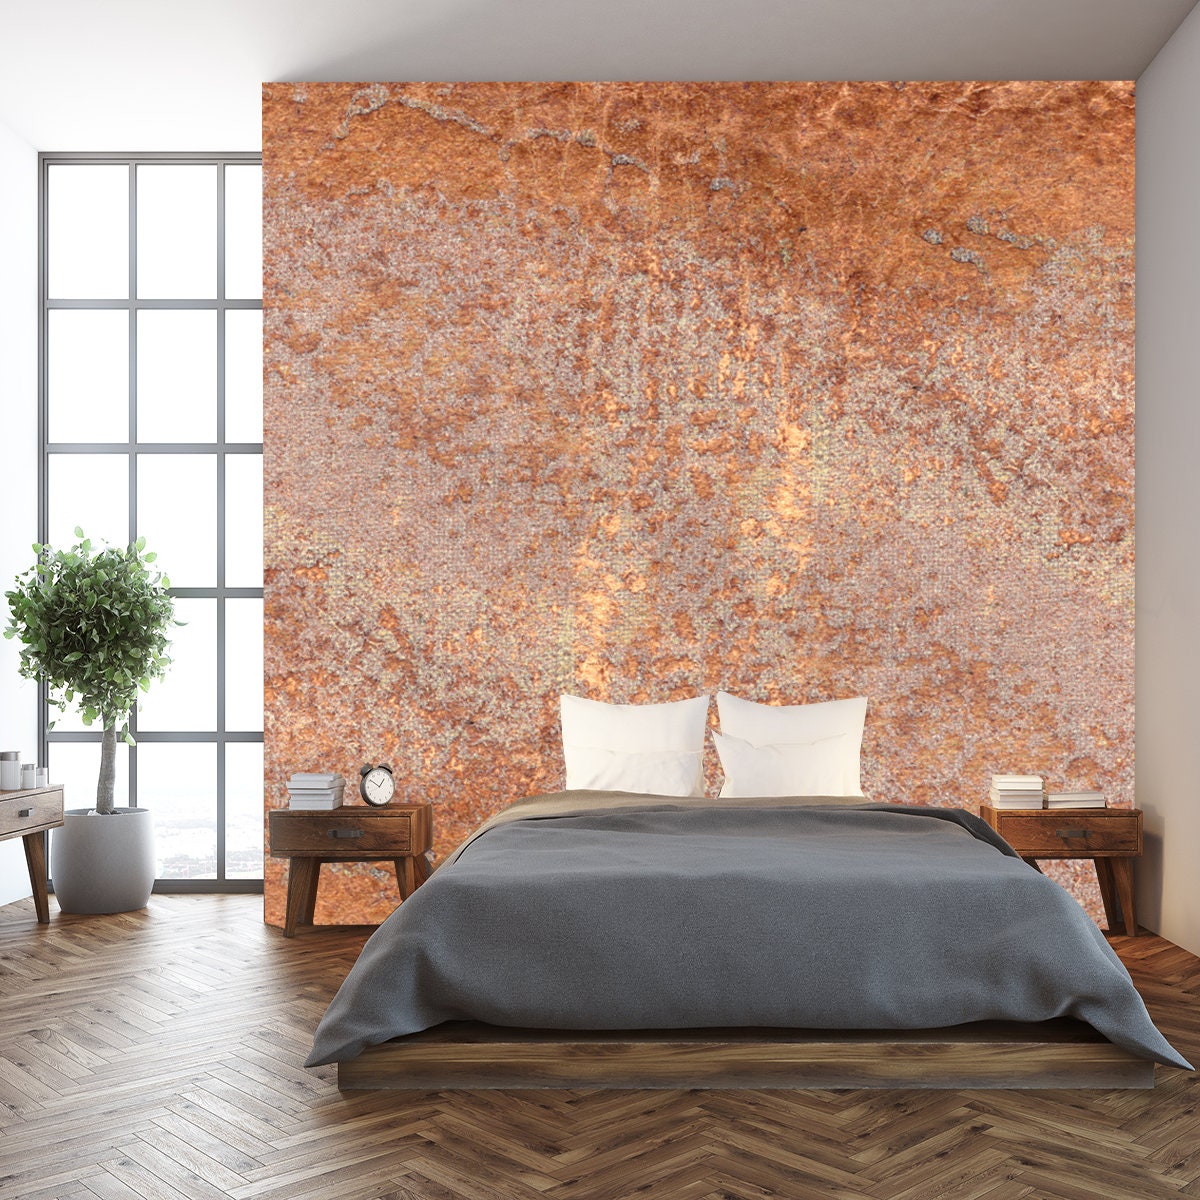 Gold and Copper Old Paper Background Wallpaper Bedroom Mural